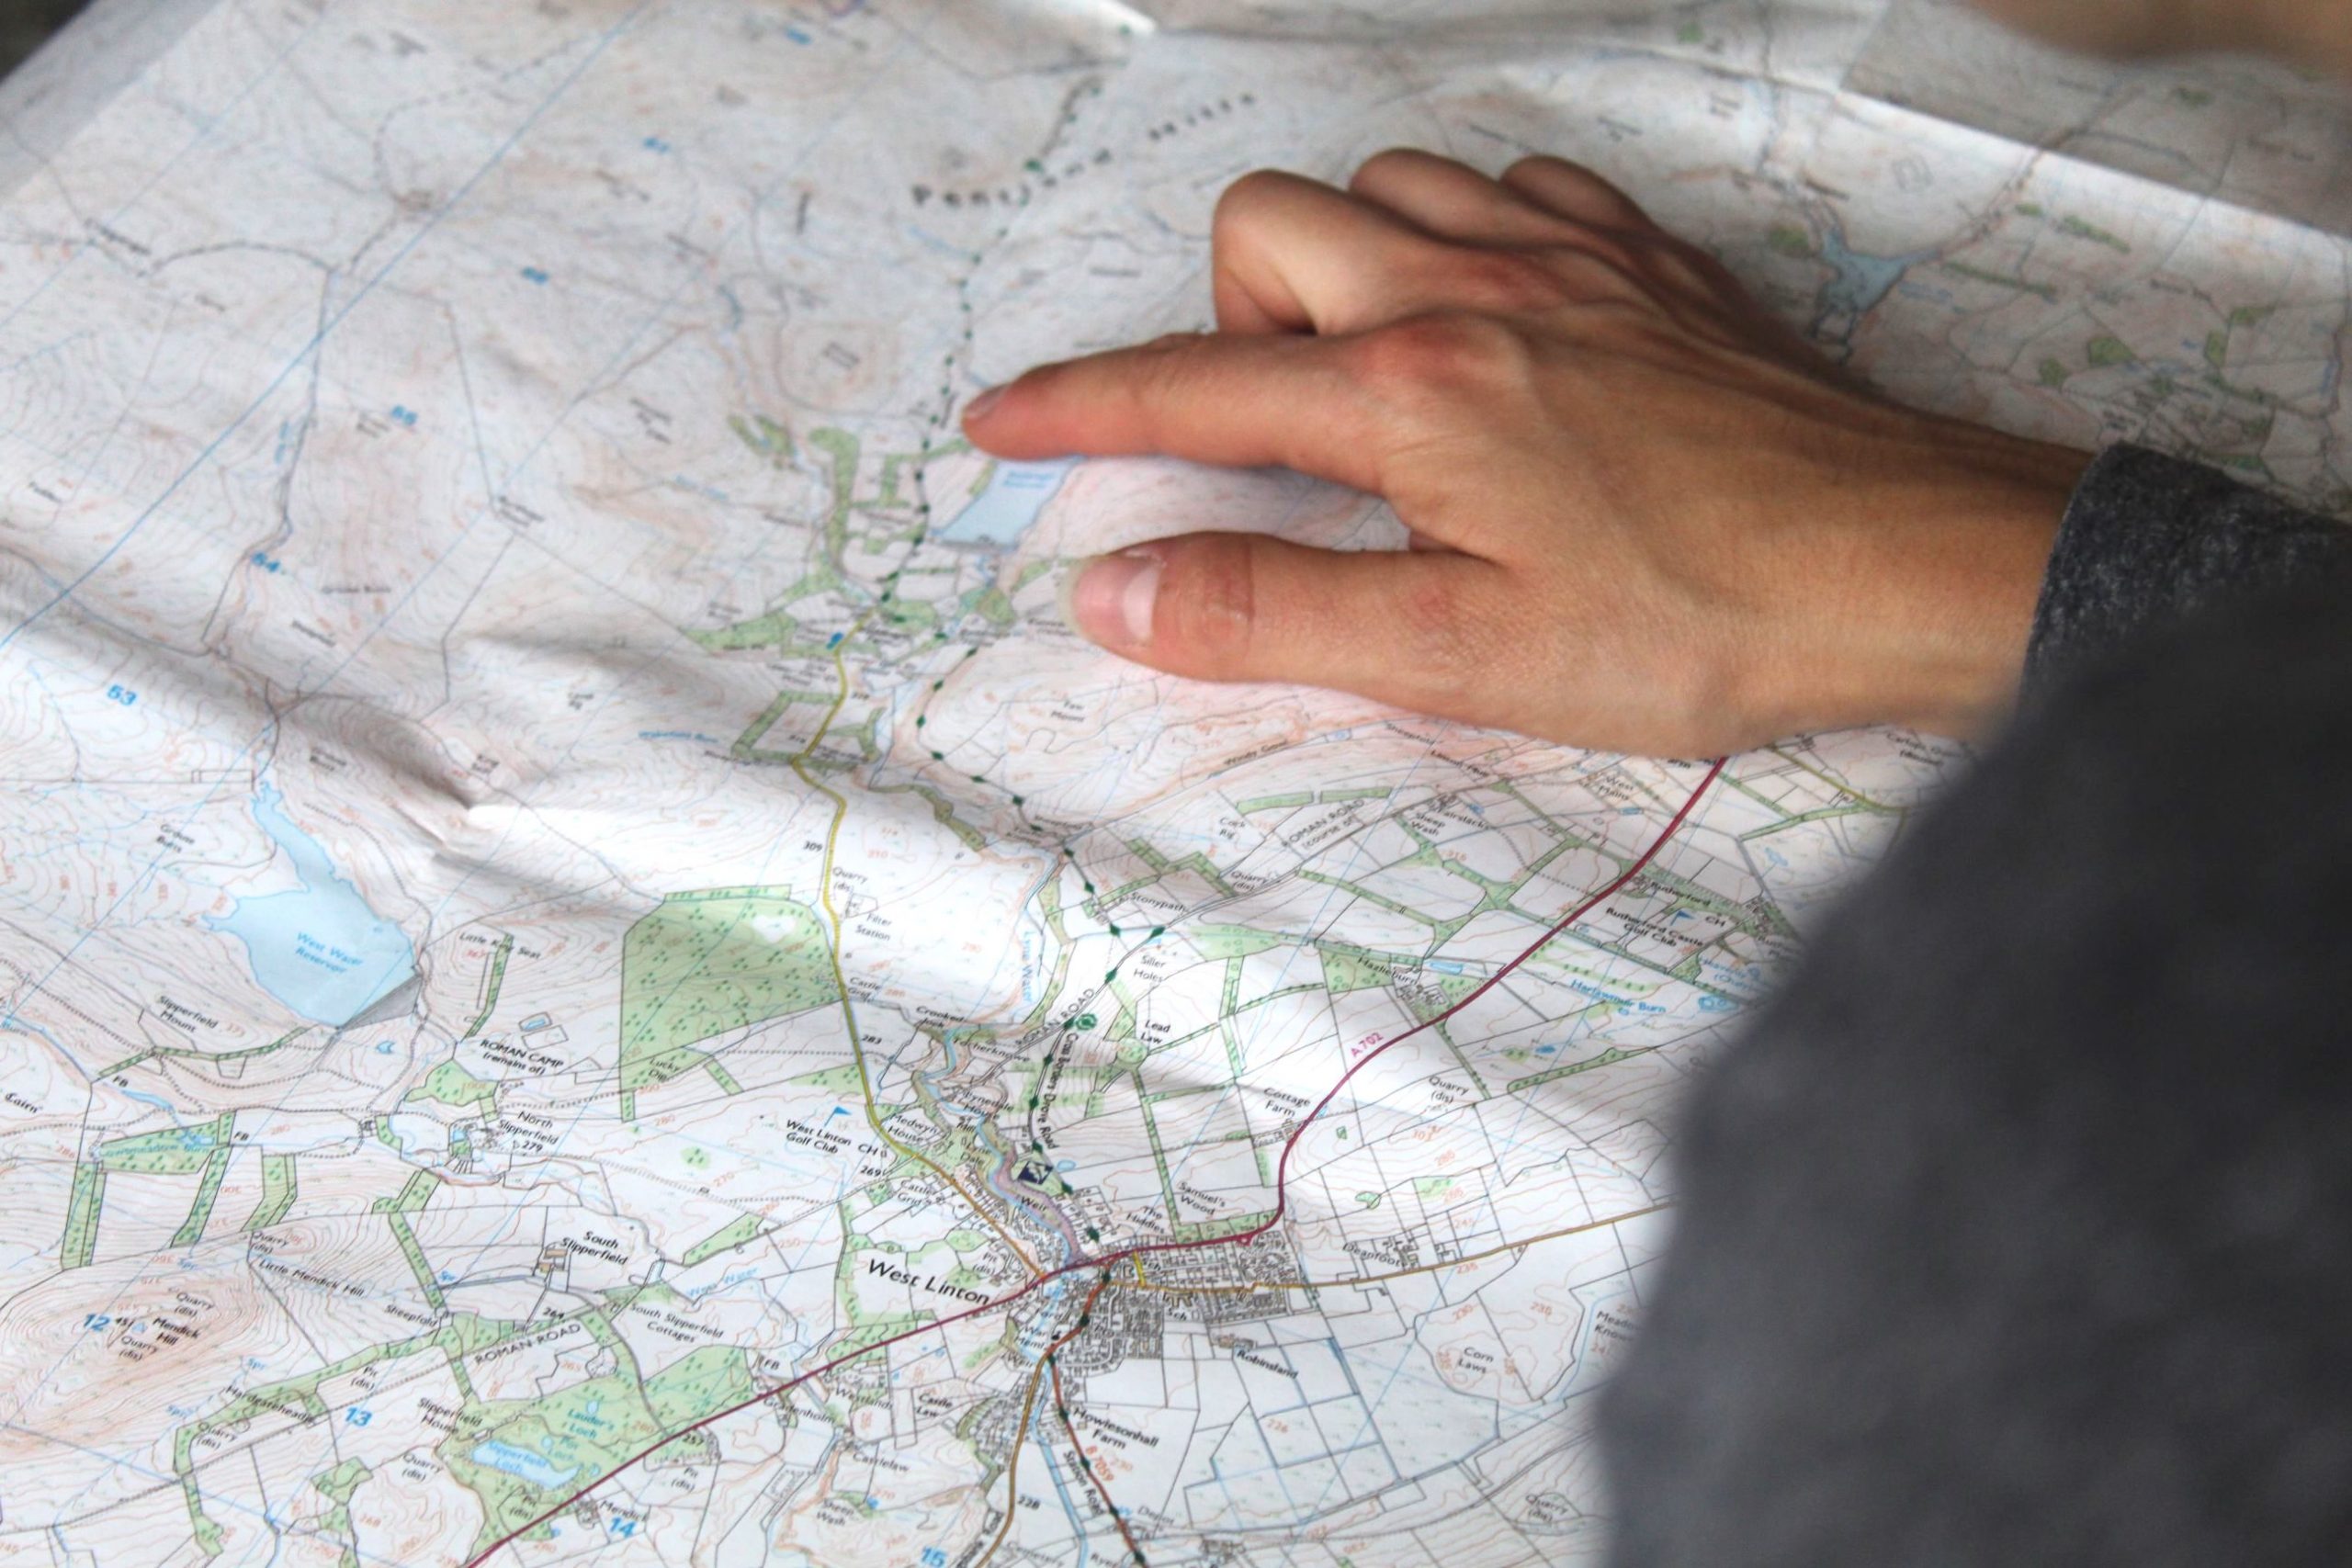 A hand hovers over an OS map of the Pentland Hills, Edinburgh, plotting a route.